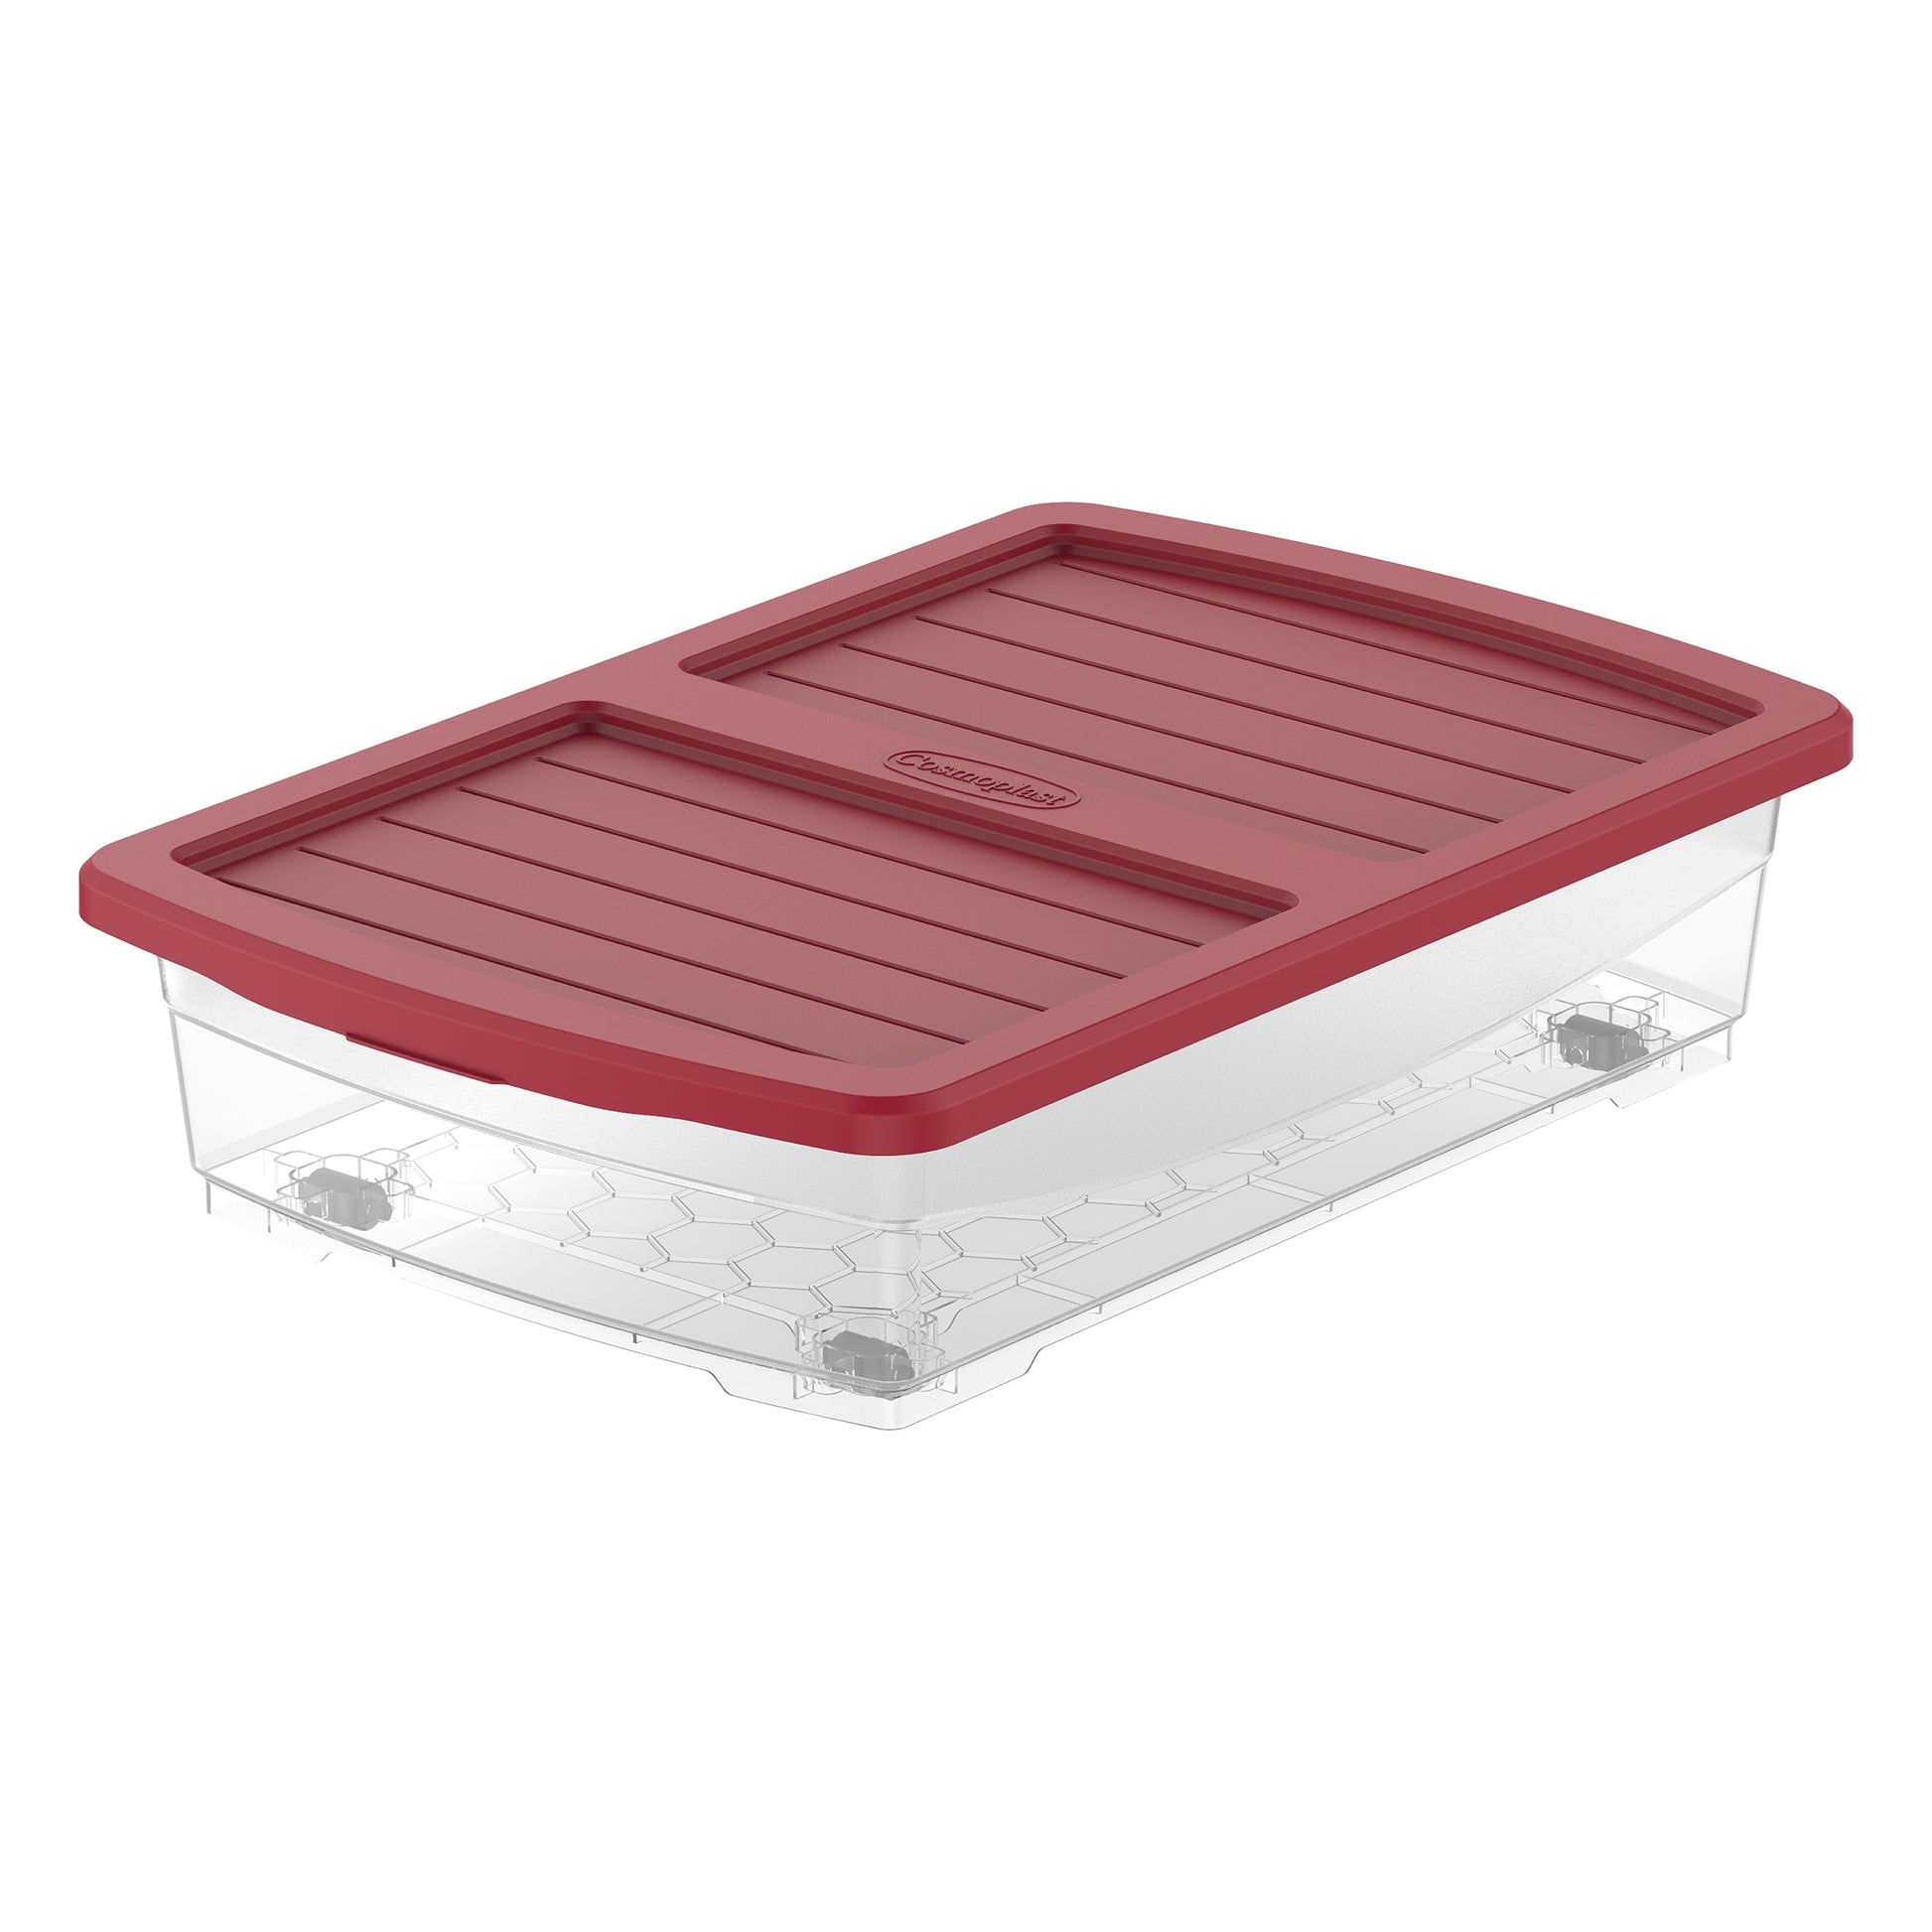  CLEAR PLASTIC UNDERBED STORAGE BOX WITH WHEELS